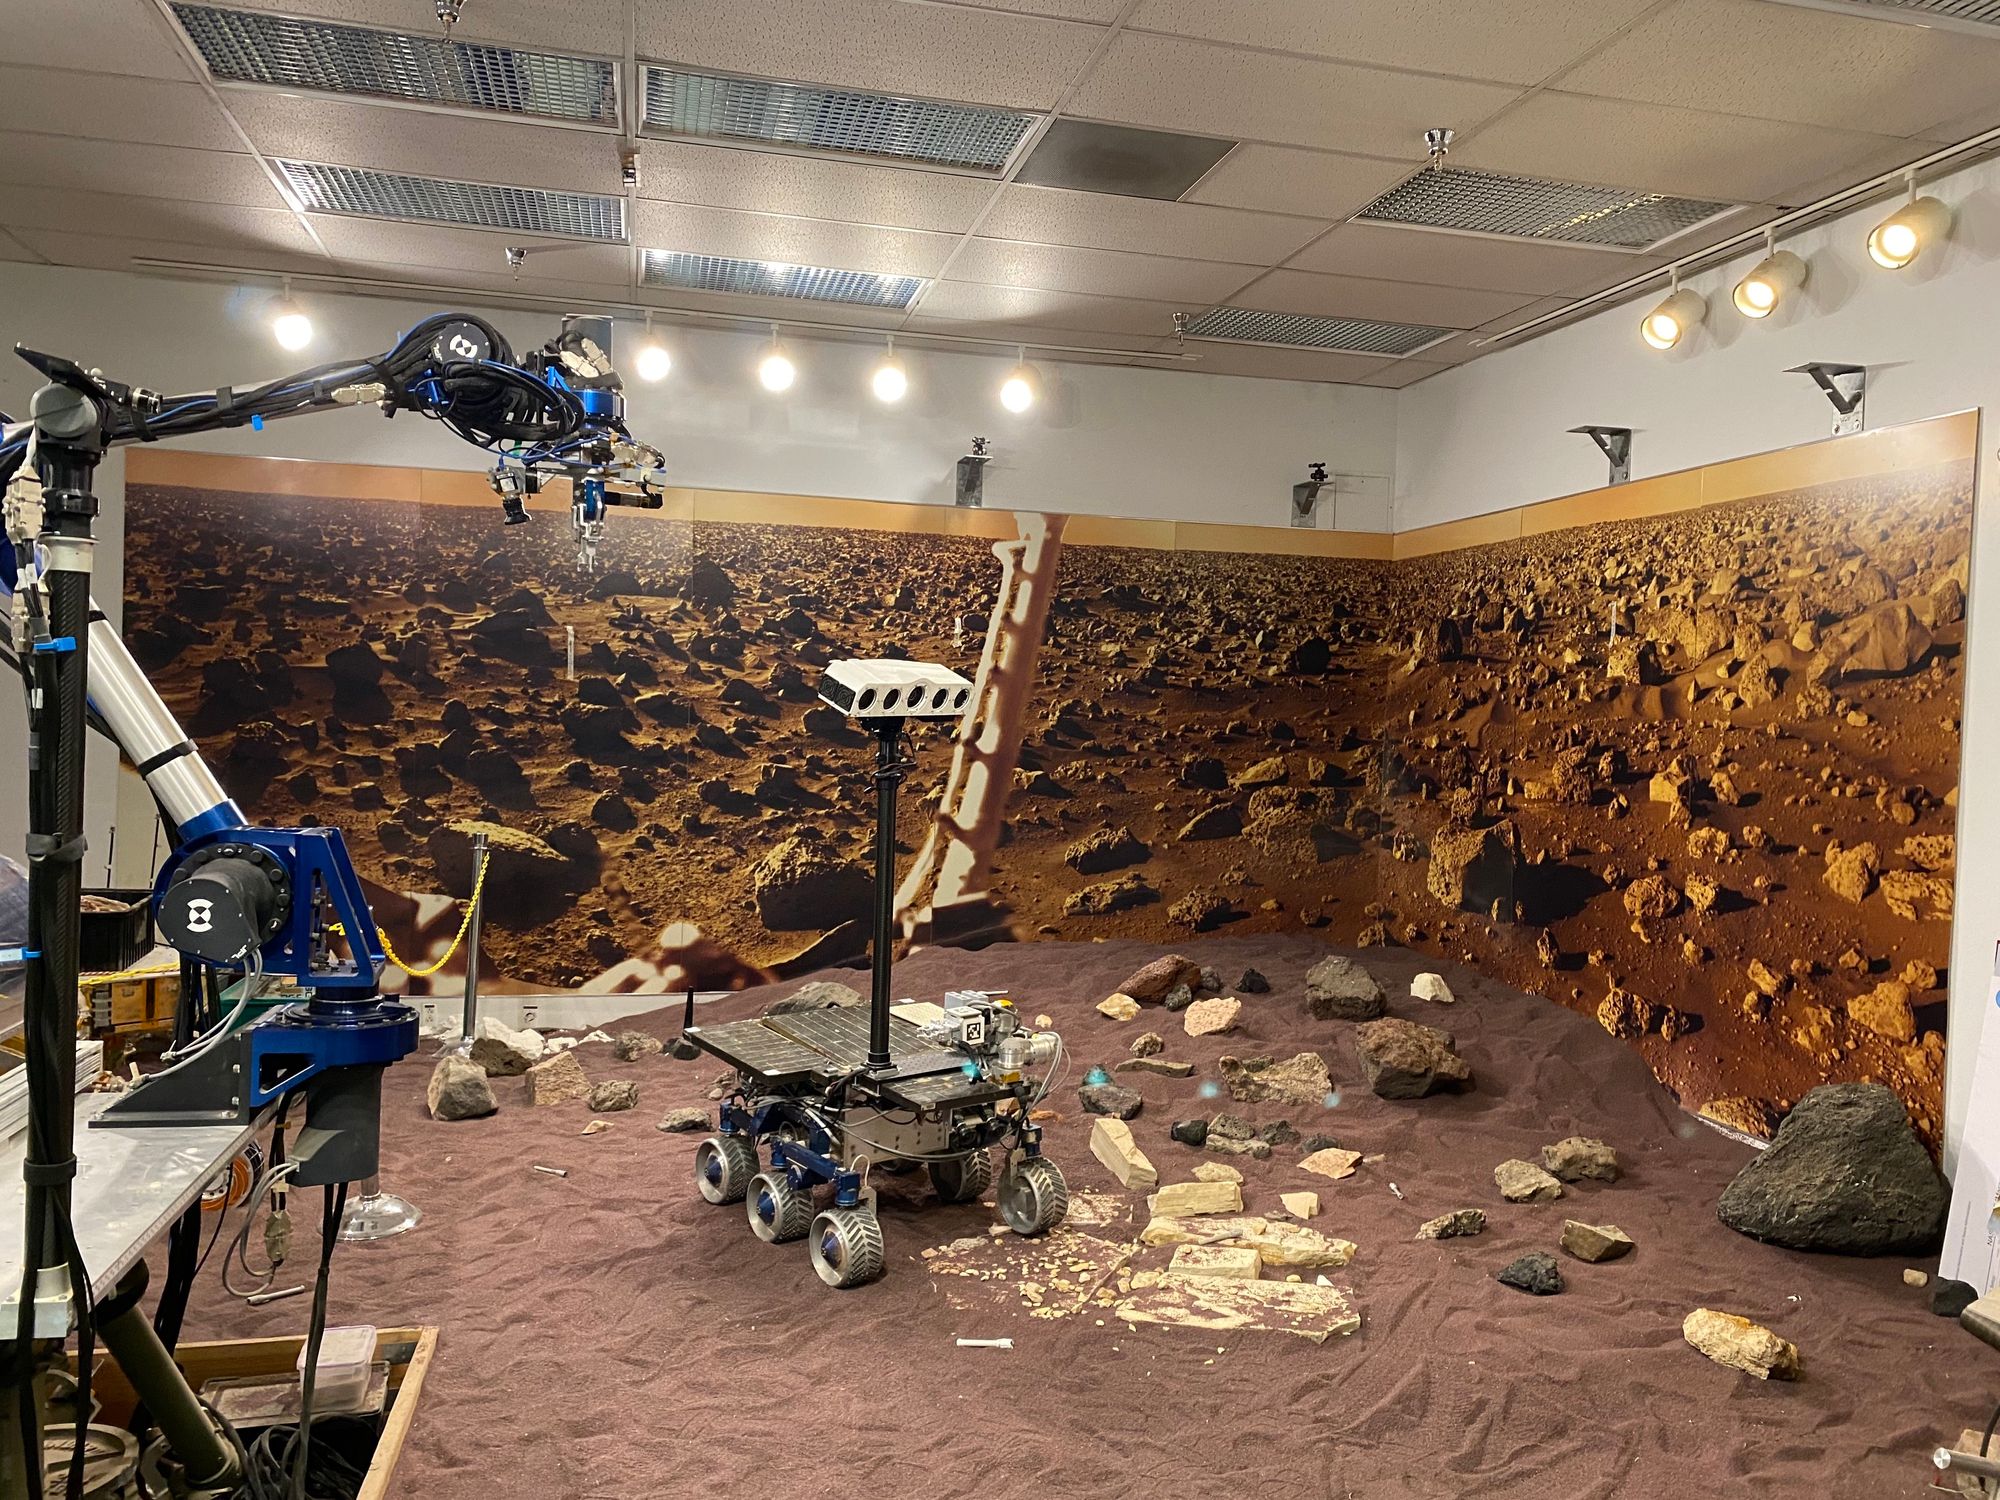 Mission to Mars: Dream of Analyzing Martian Soil for Signs of Life May Soon be Reality